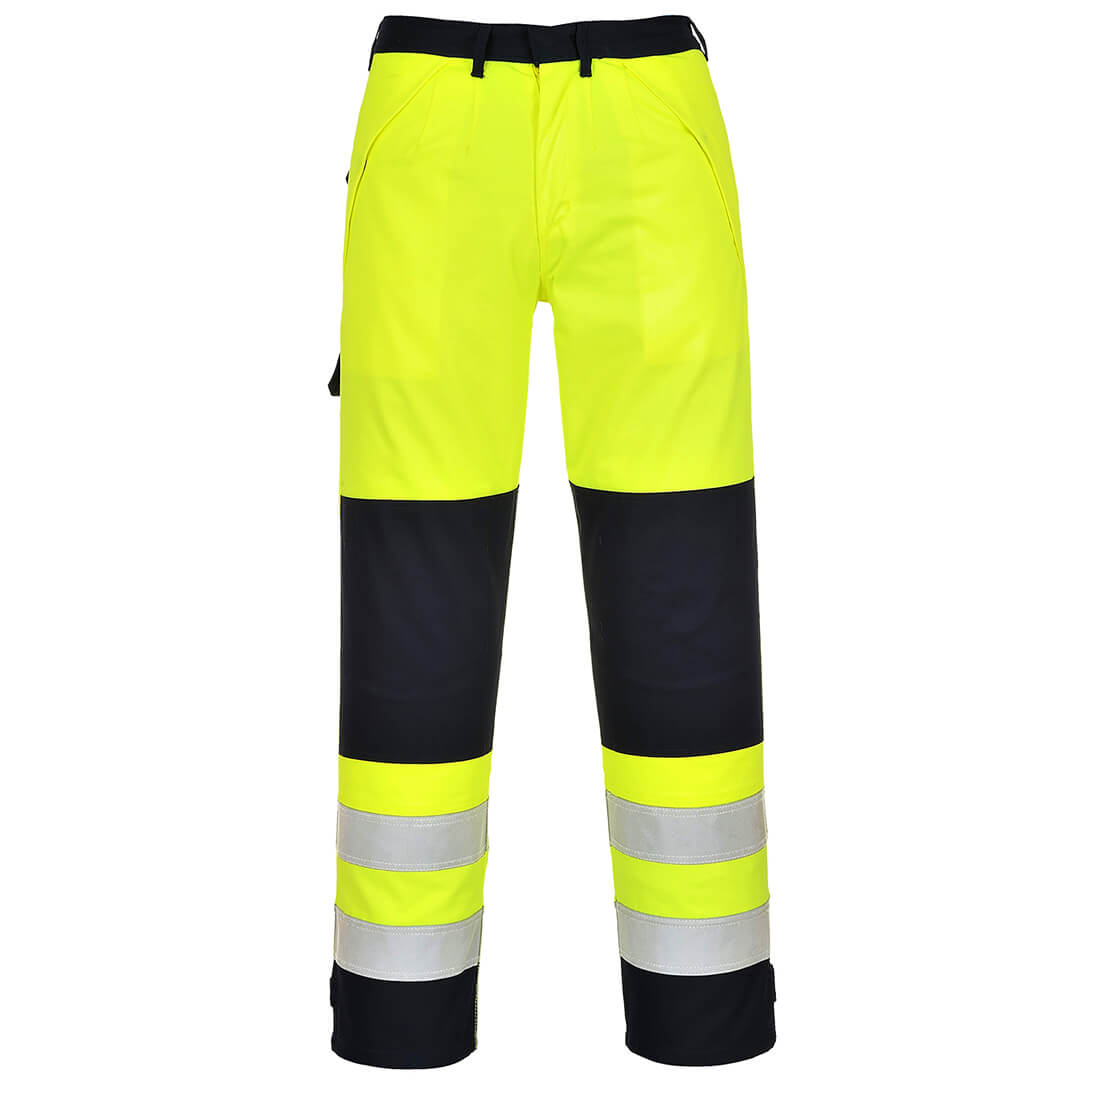 Photo of Biz Flame Hi Vis Multi-norm Flame Resistant Trousers Yellow / Navy 2xl